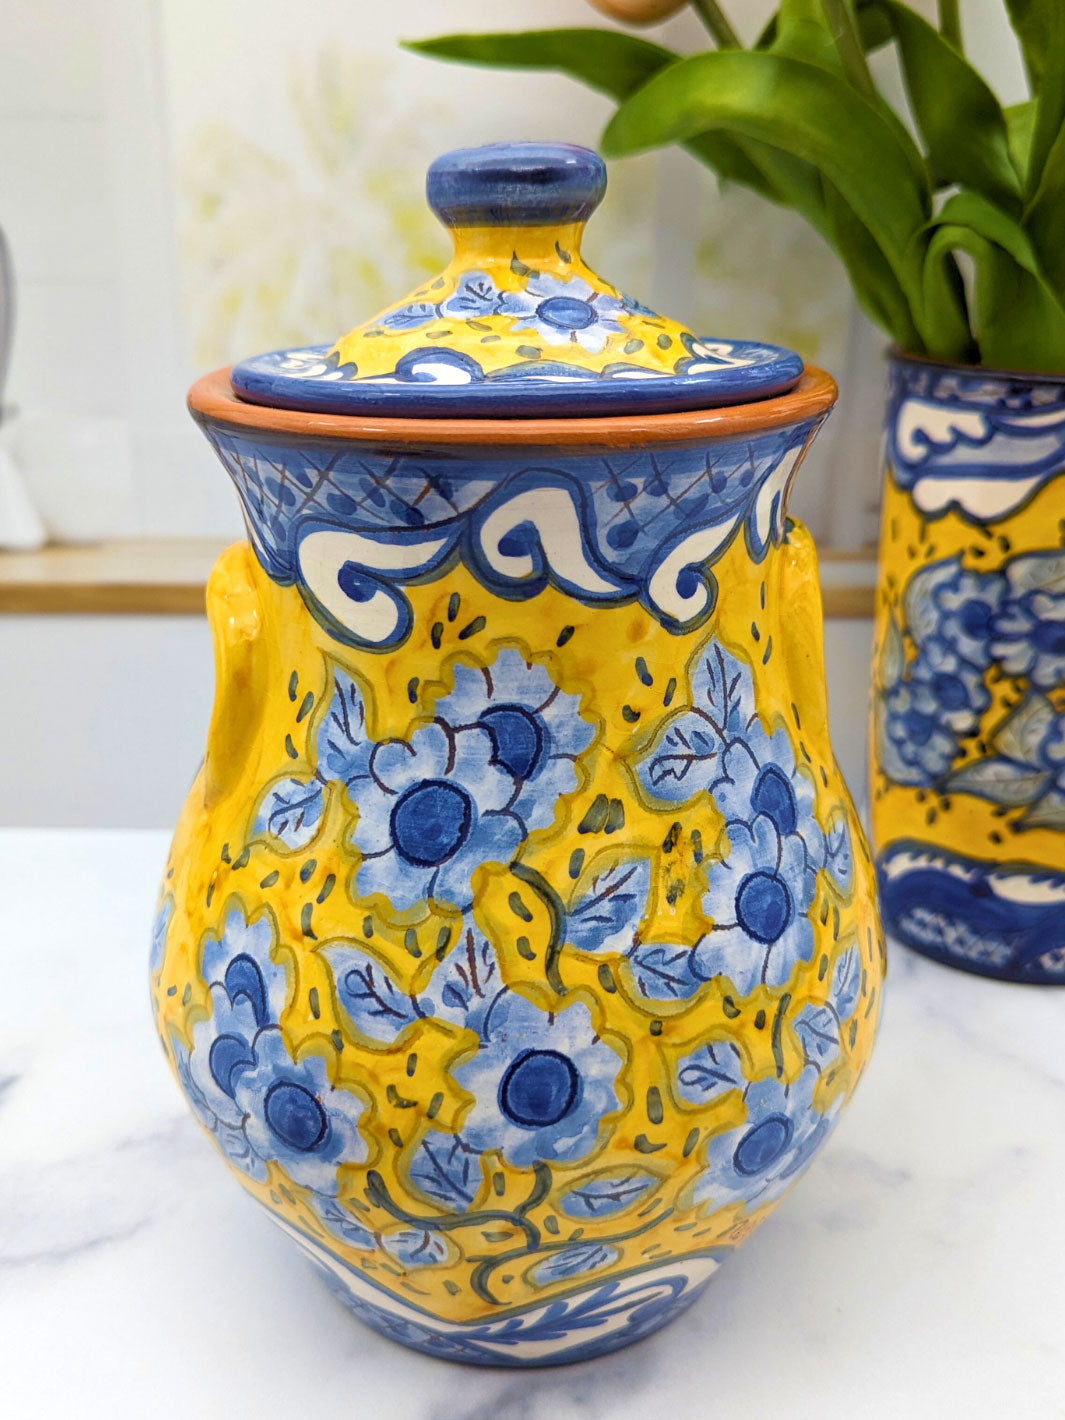 Blue & Yellow Vintage Floral Ceramic Kitchen Canisters - Set of 2